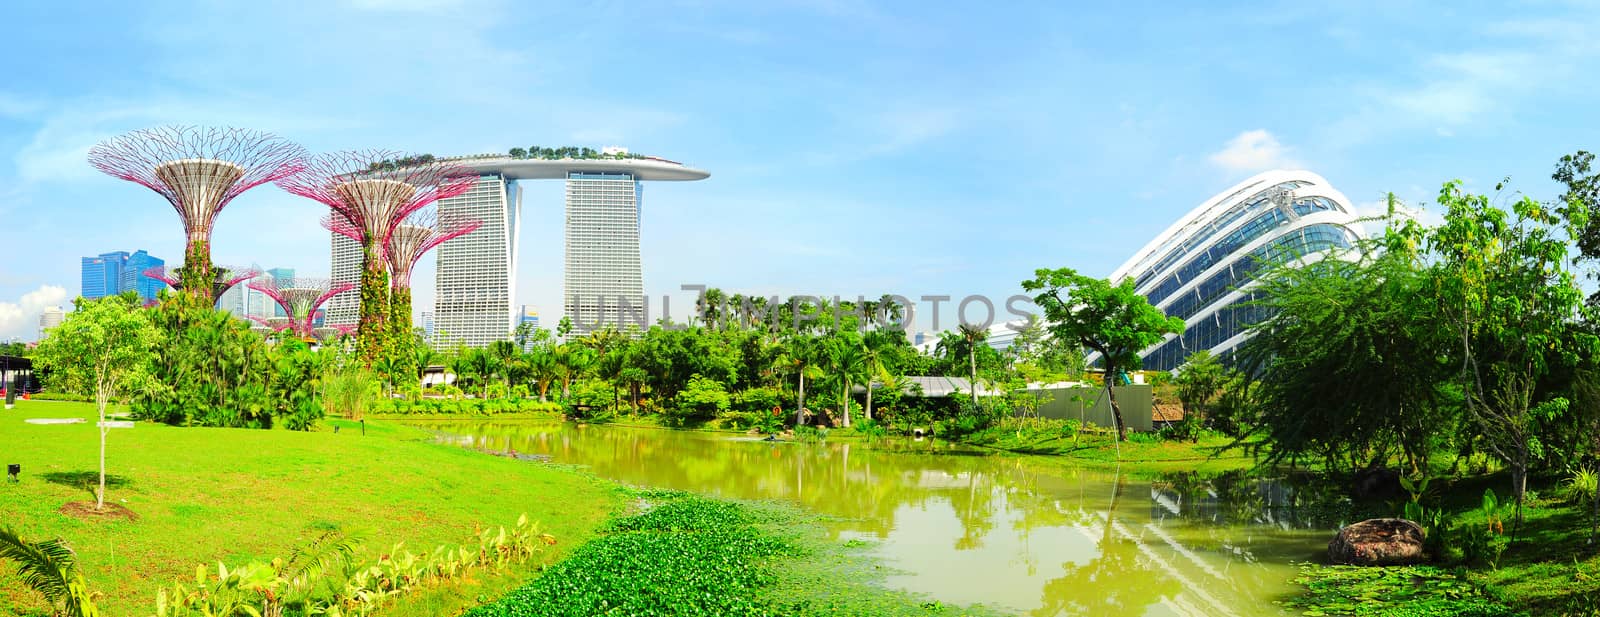 Singapore, Republic of Singapore - May 09, 2013: Panoramic view of Gardens by the Bay in Singapore. Gardens by the Bay was crowned World Building of the Year at the World Architecture Festival 2012 